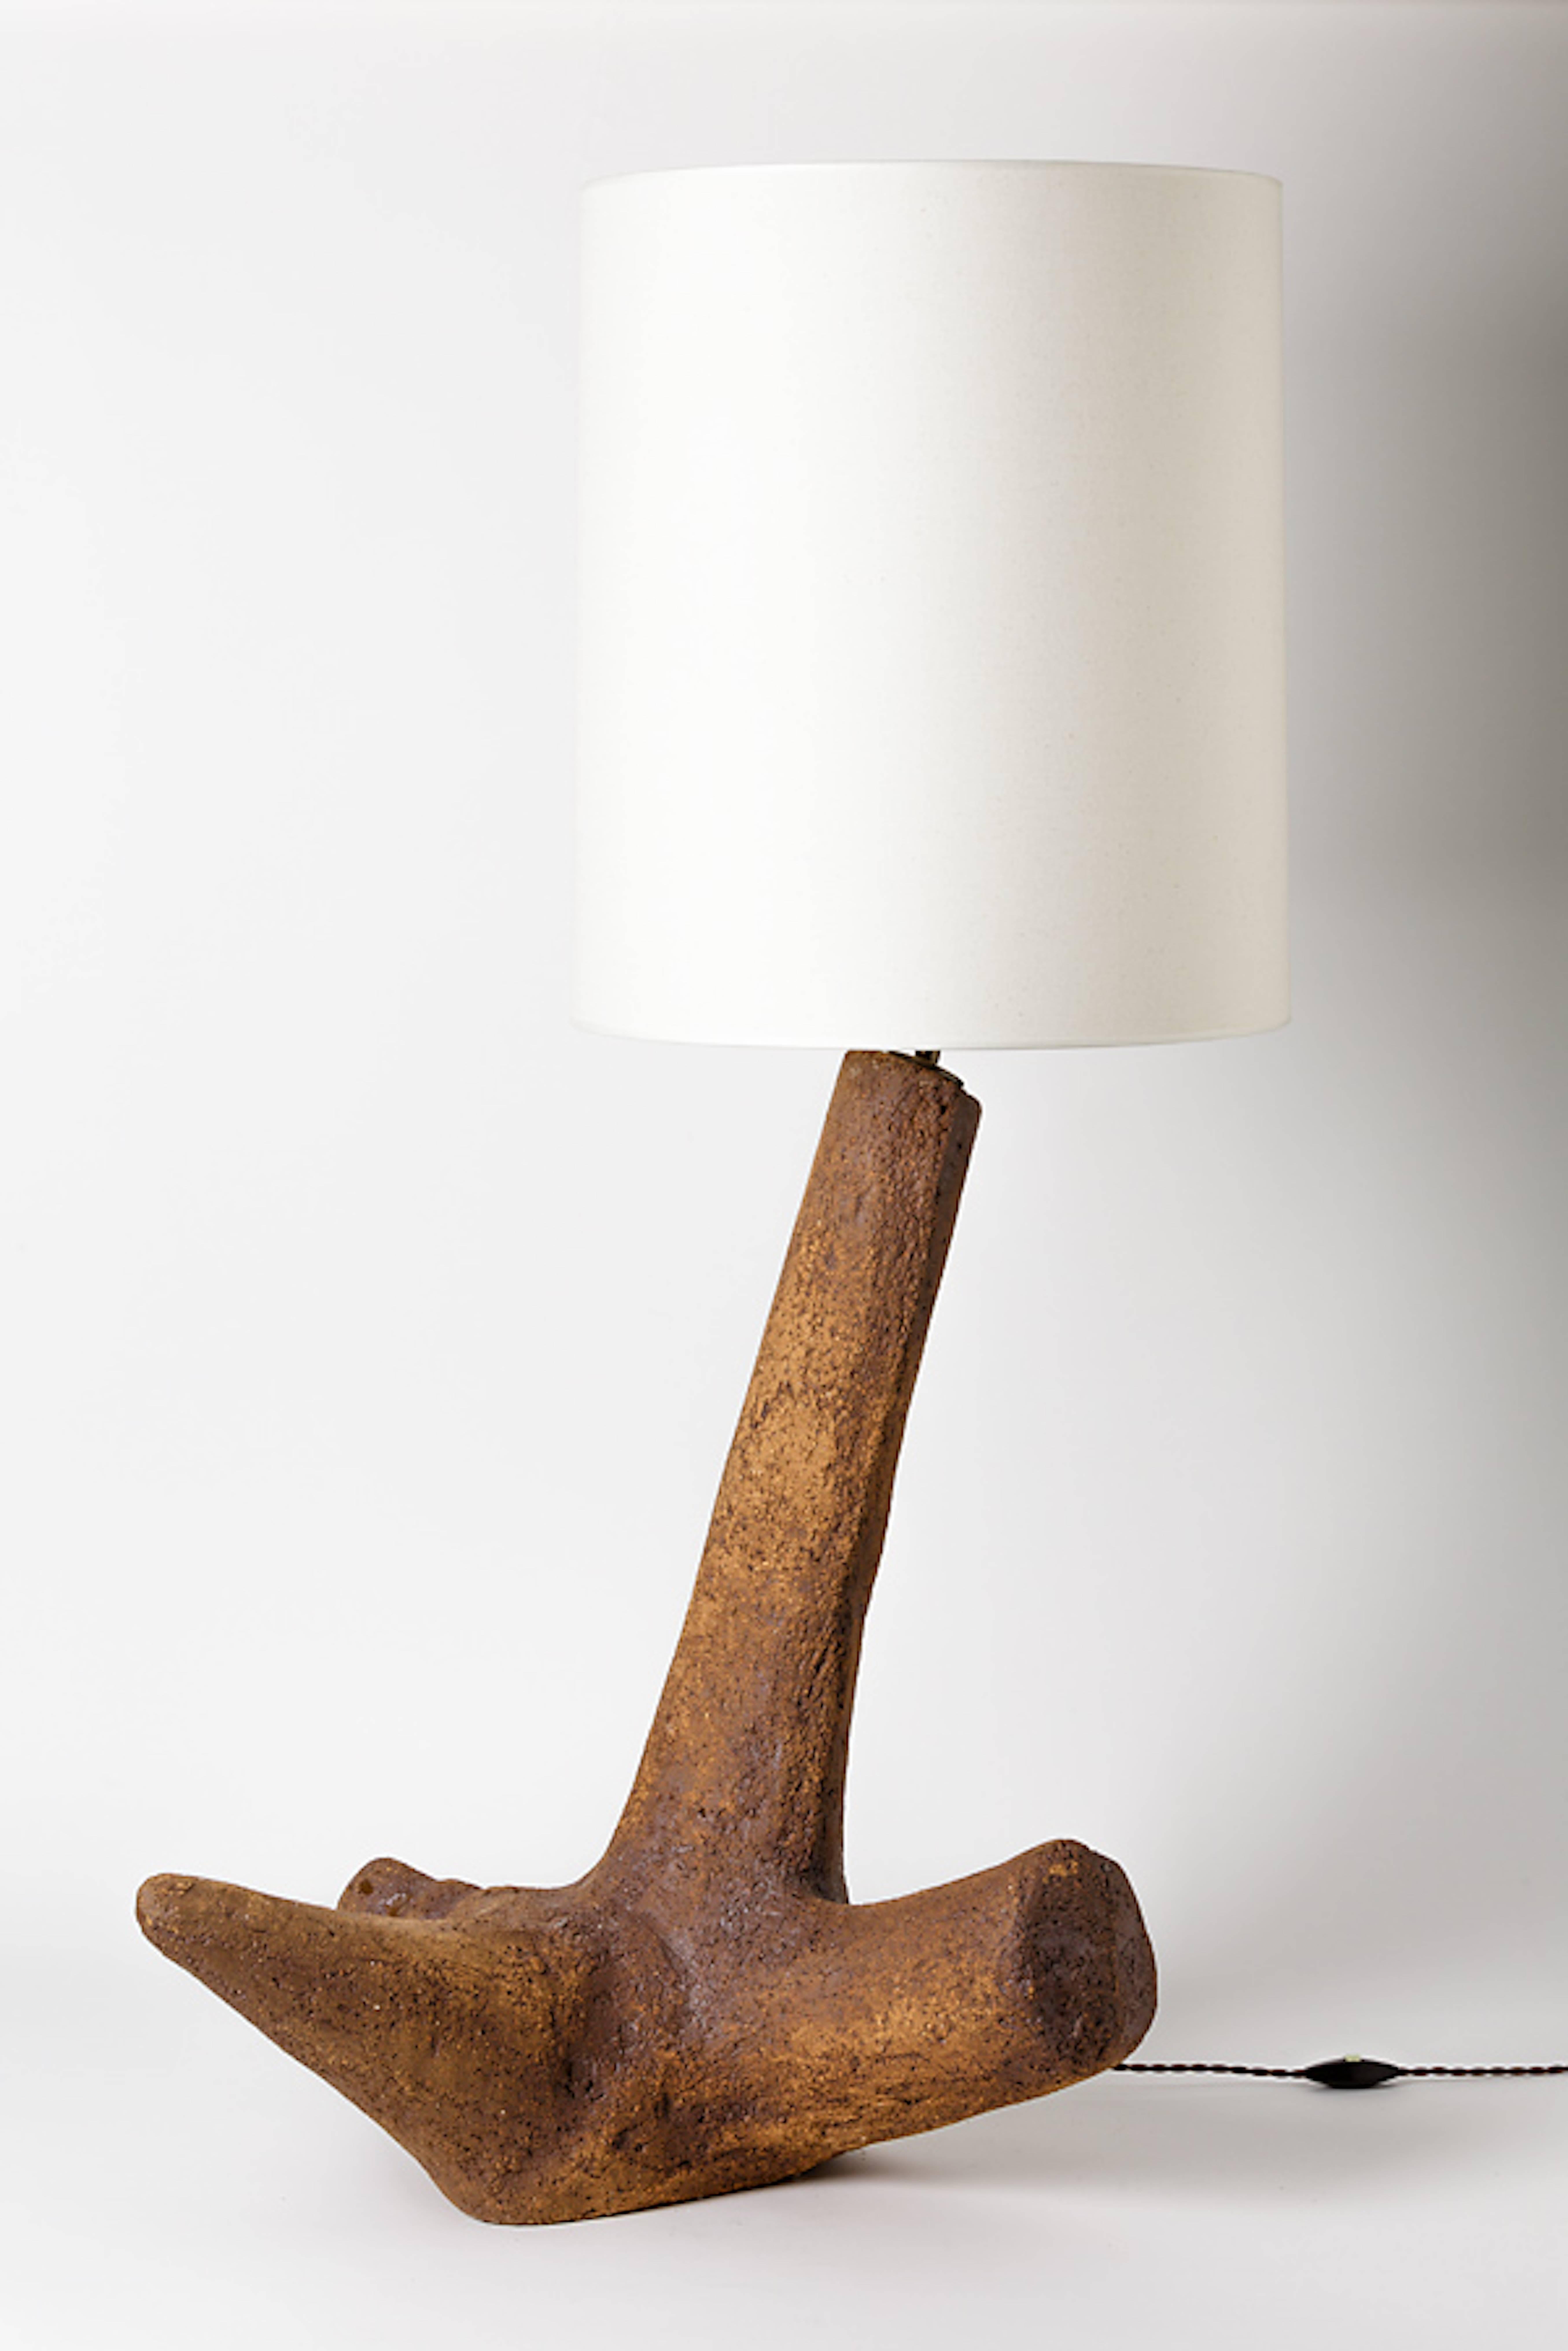 An exceptional and important ceramic lamp by Tim Orr.
Signed at the base.
Unique piece,

Sold with lamp shade and new electrical system.

Height with lamp shade: 43' 1/3 inch.
Height without lamp shade: 29' 1/2 inch.
Height without